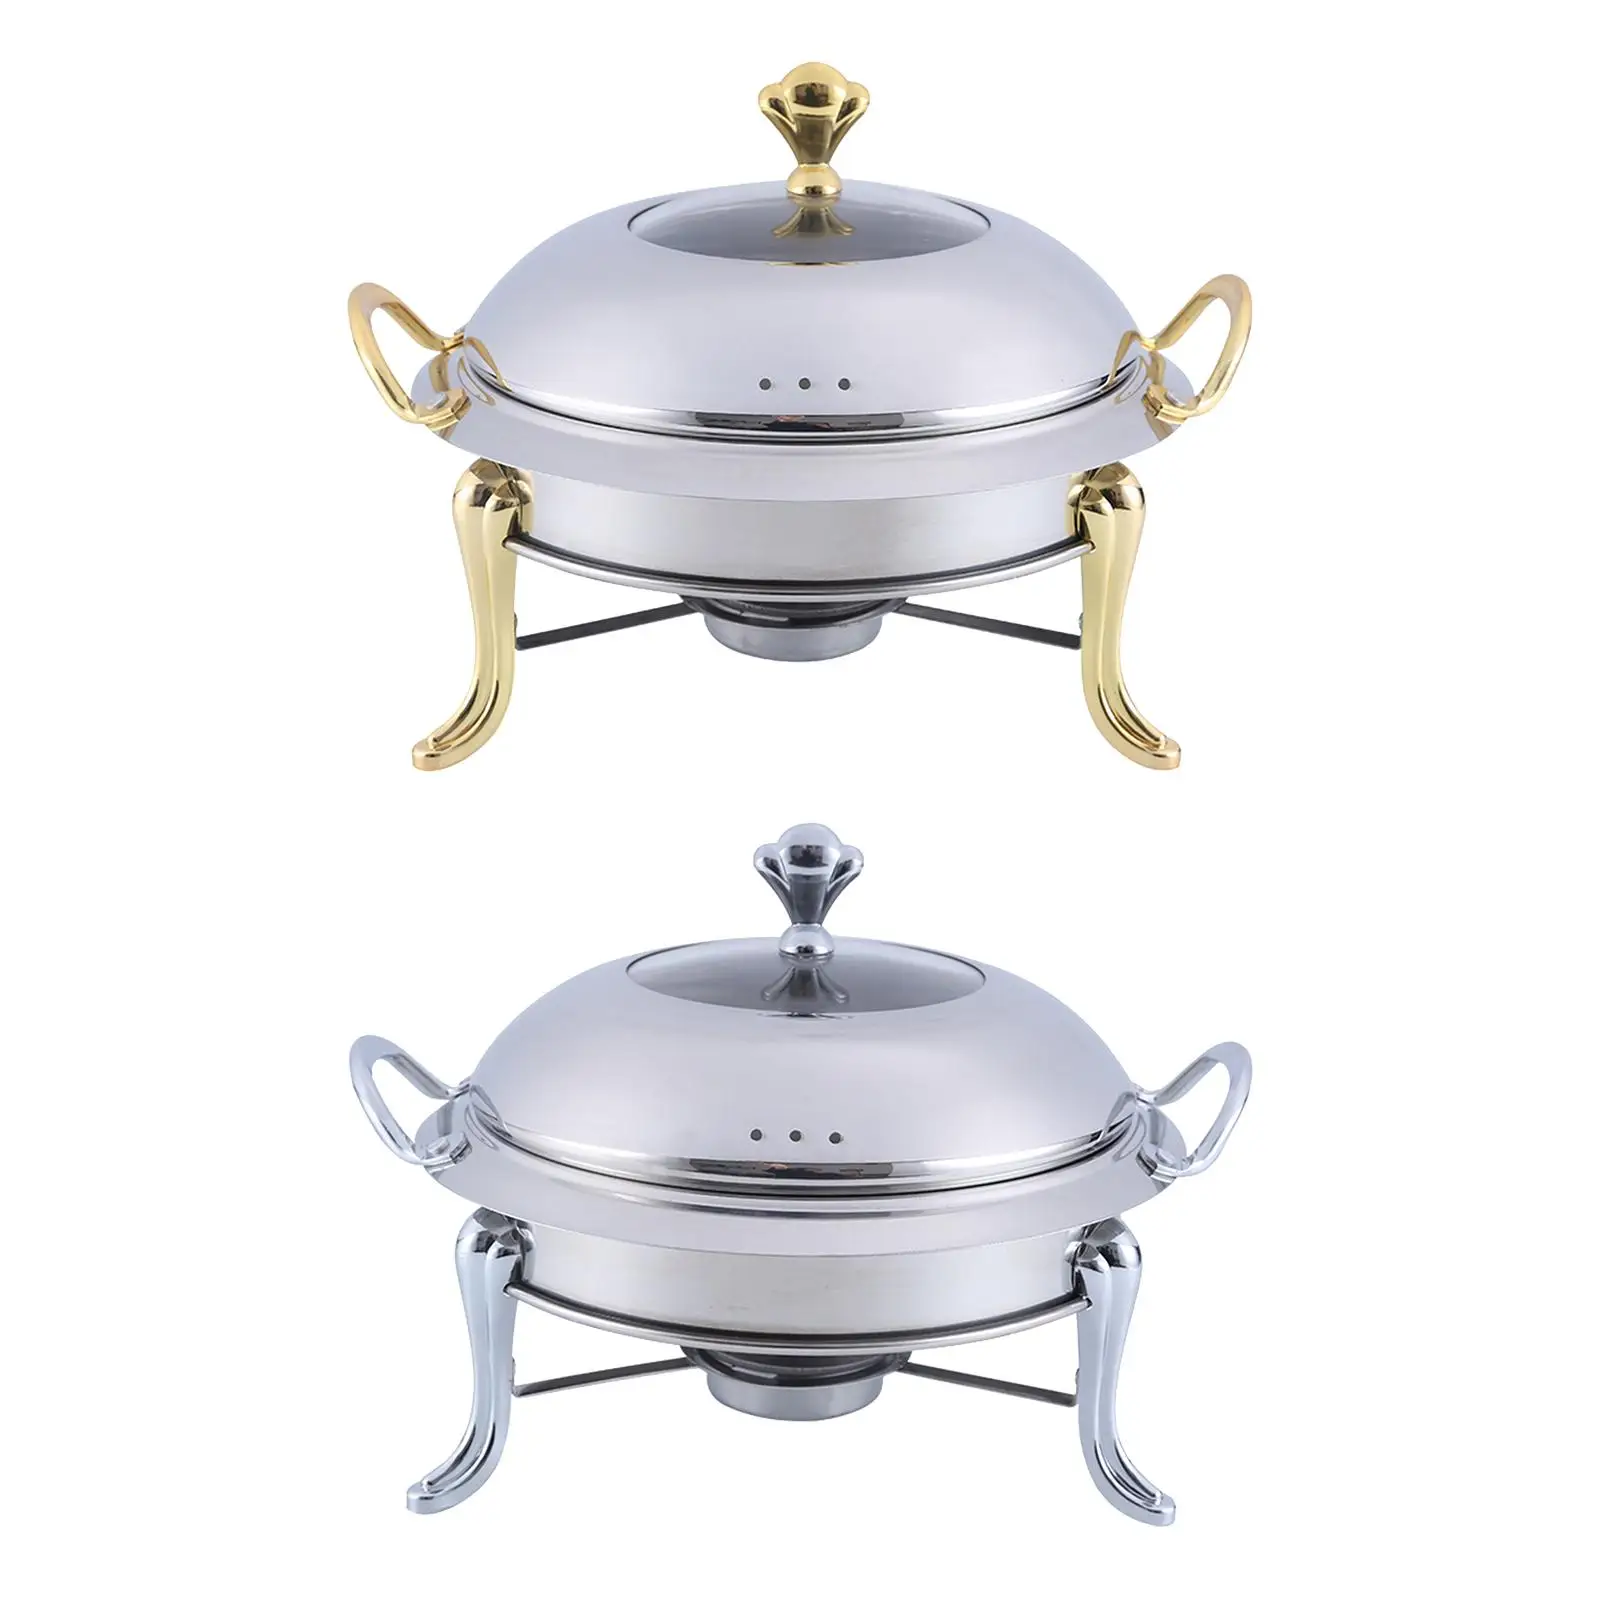 Food Warmers High Efficiency Catering Warmer Set Stainless Steel Chafing Dish Buffet Set for Camping Outdoor Hotel Household